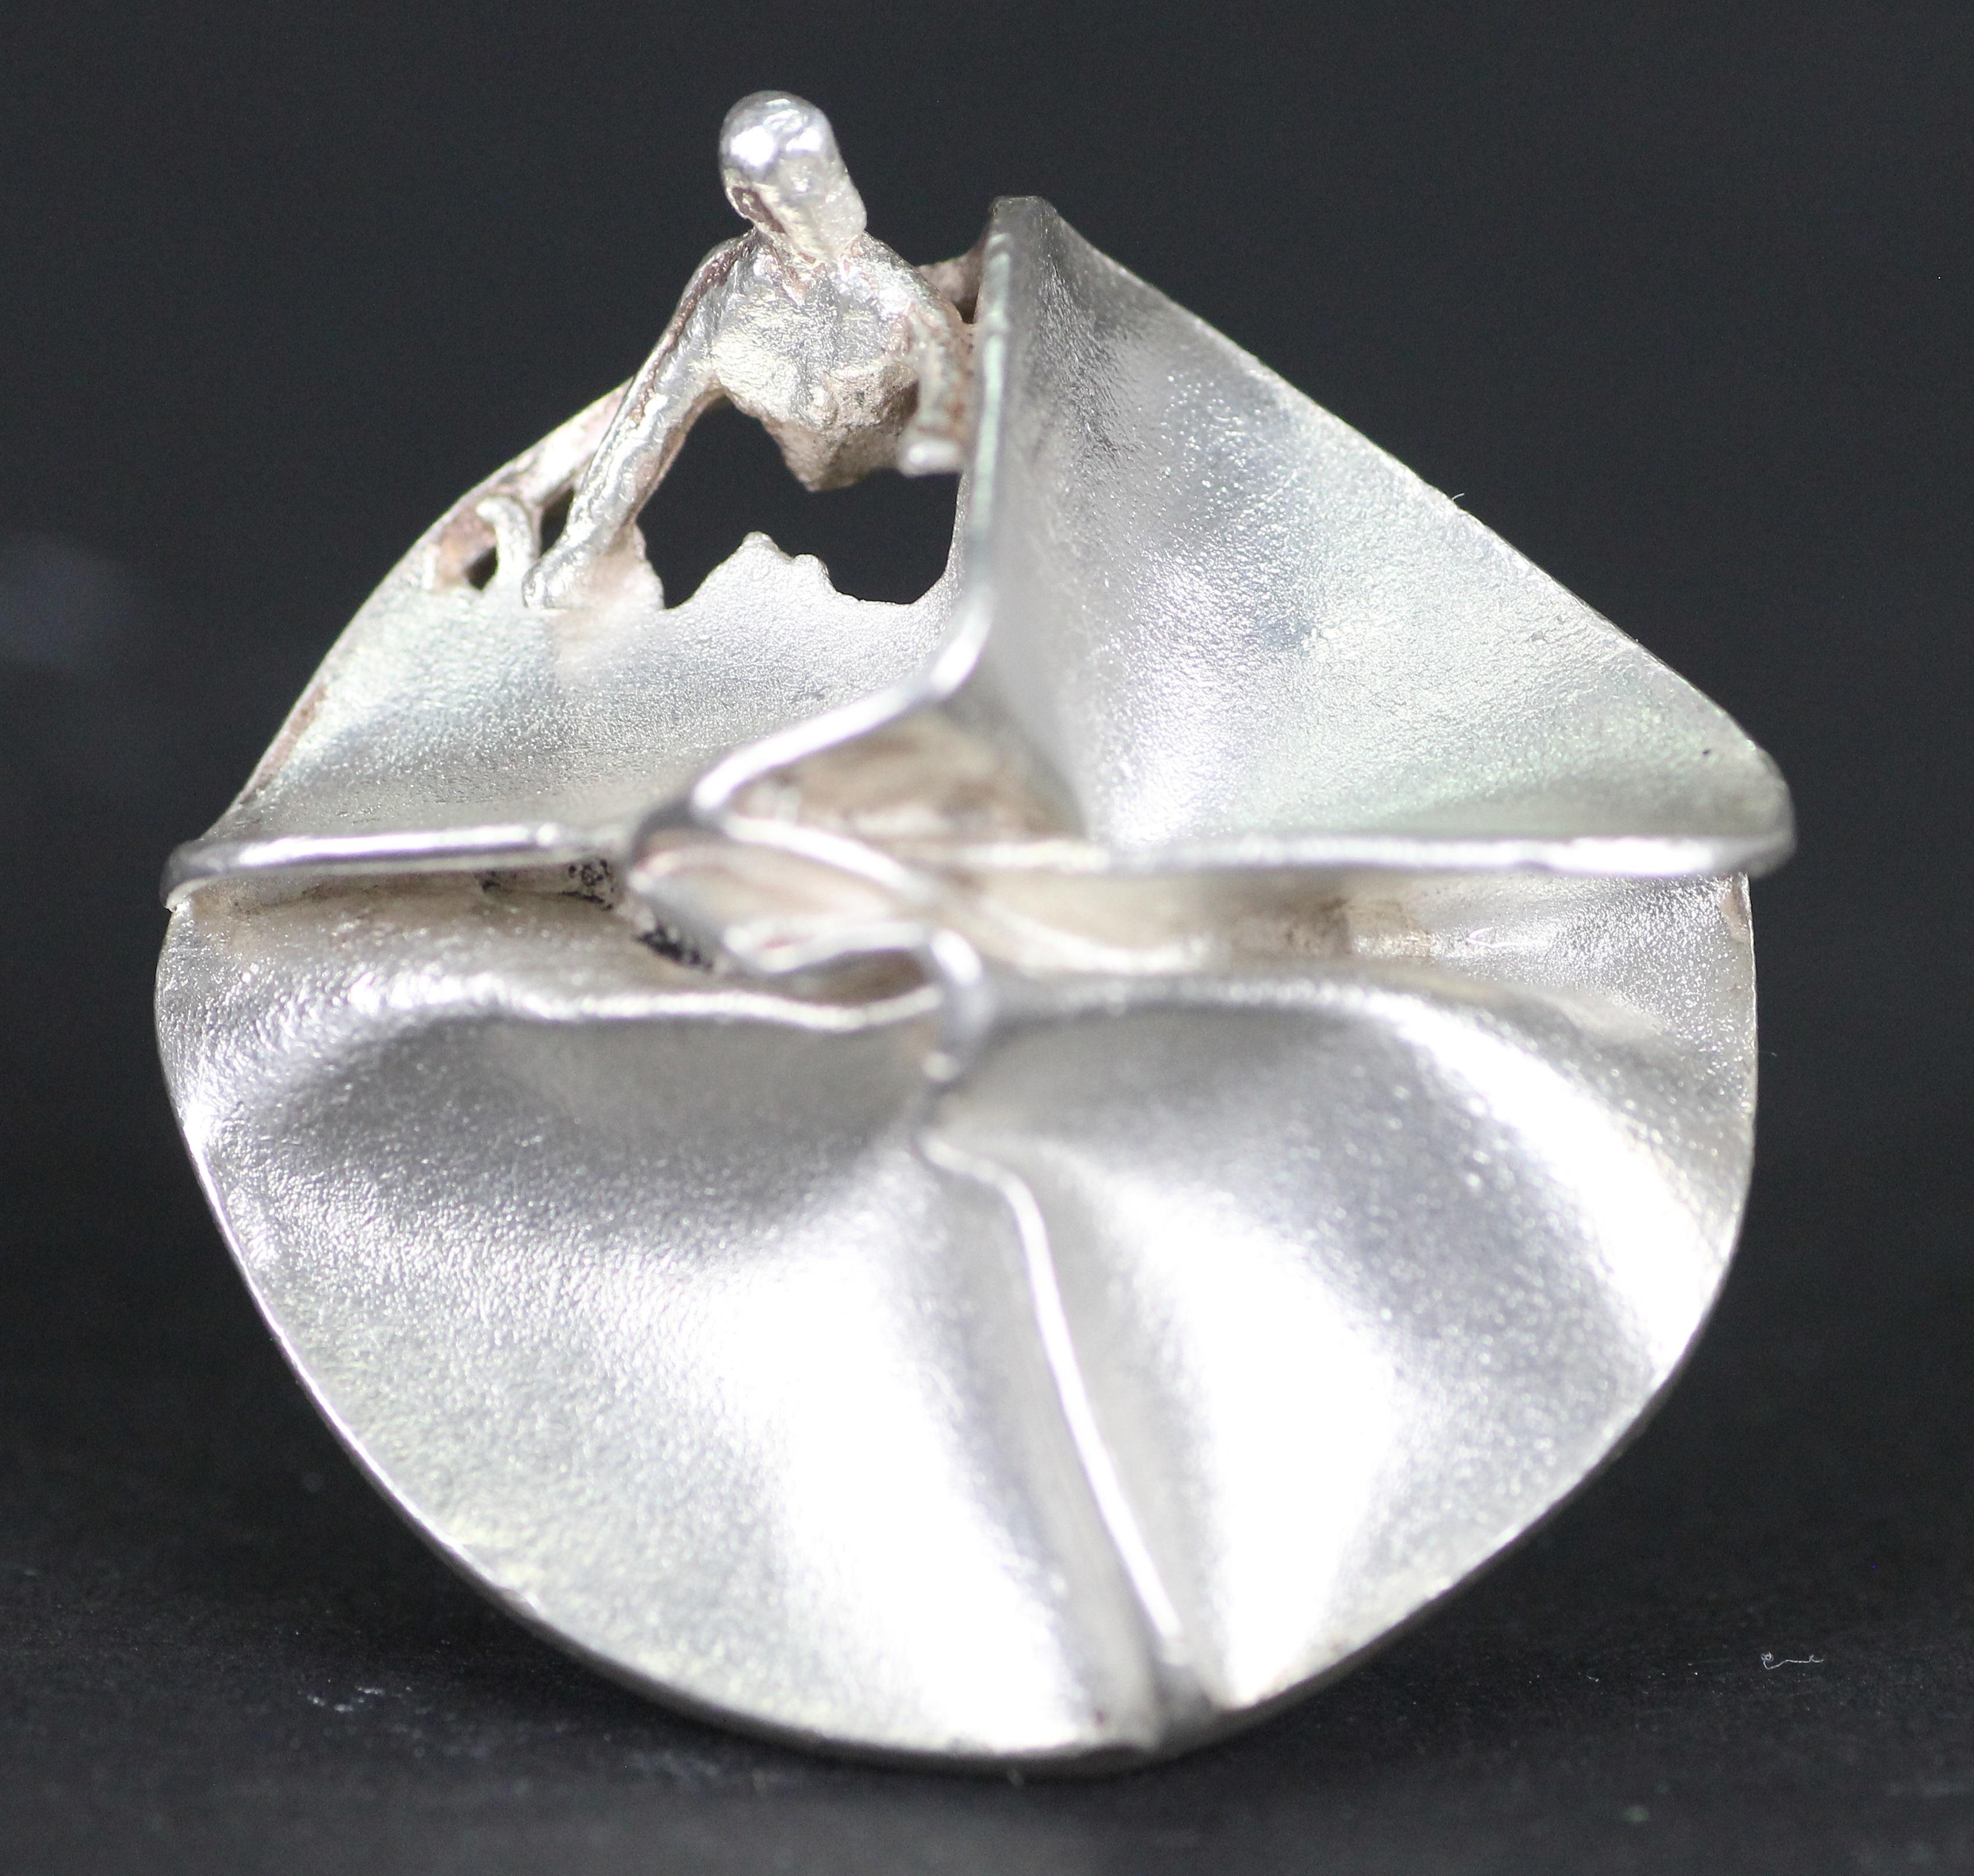 Finnish modernist ring in sterling silver.
From the “Space Age” series by Björn Weckström for Lapponia.
Very nice condition. Outside diameter 3.5cm.
Ring size 15.5cm. US size 5.